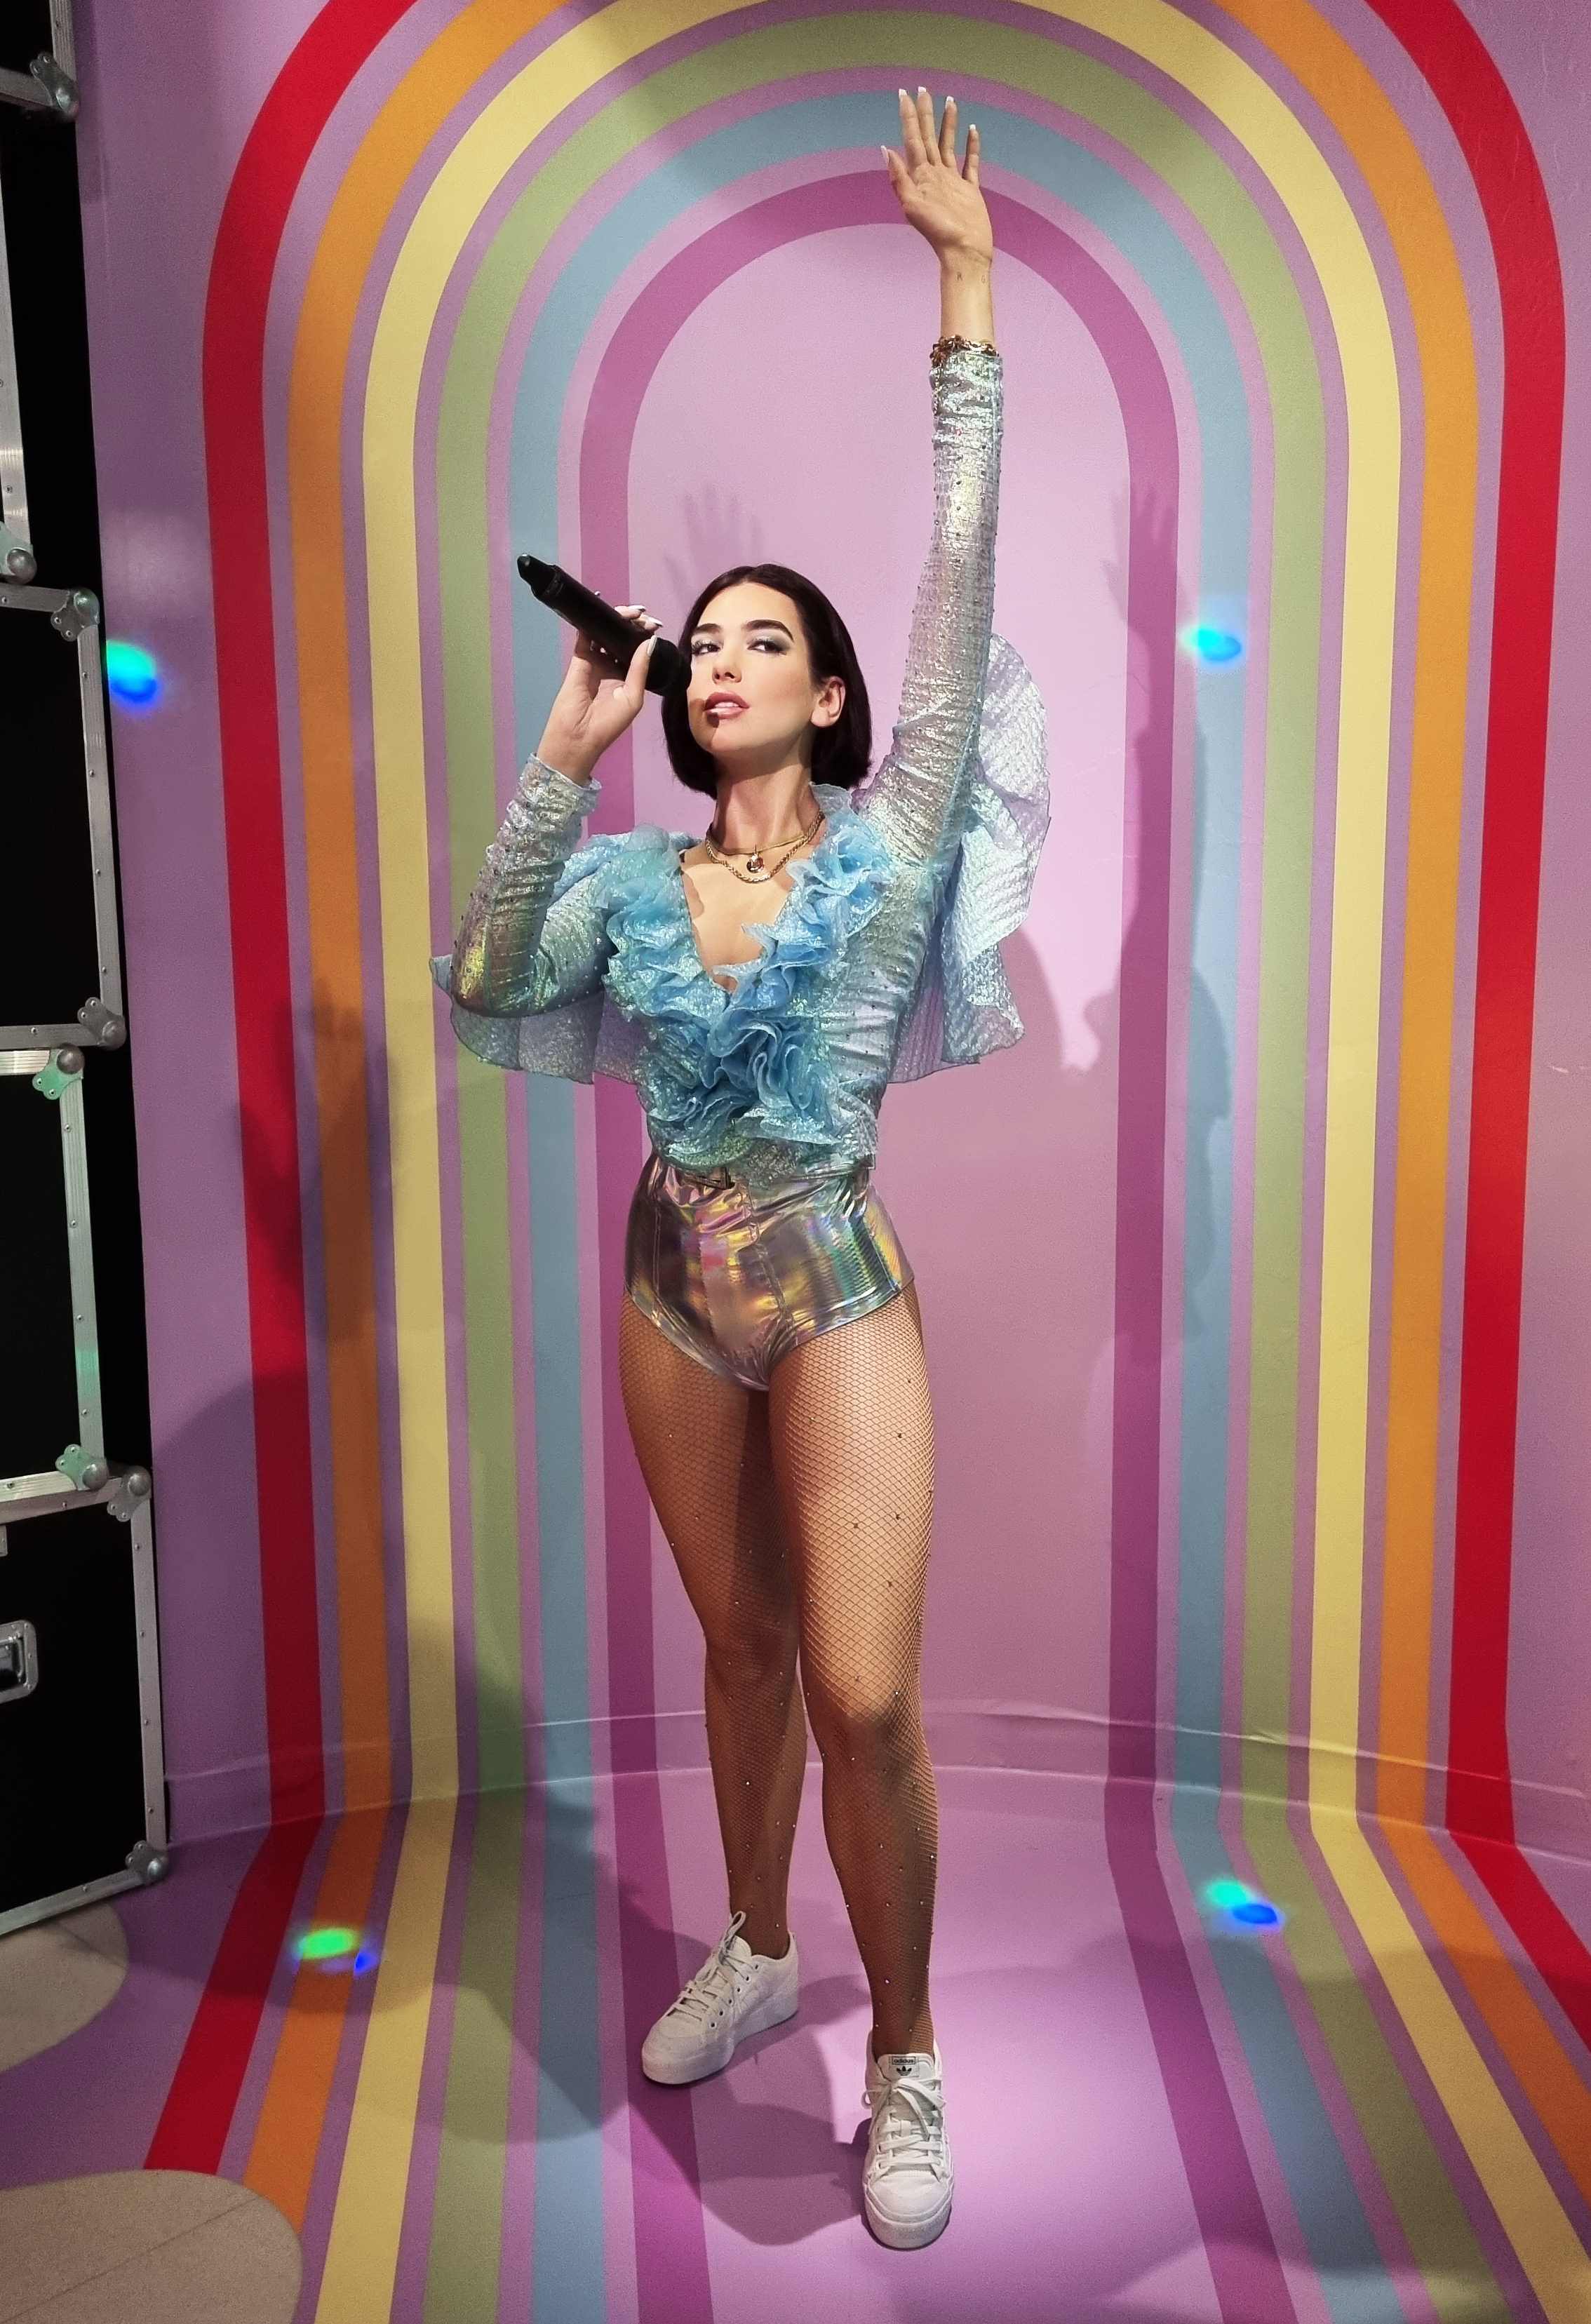 Dua Lipa’s fifth wax figure is dressed in a blue iridescent ruffle top and holographic pants.